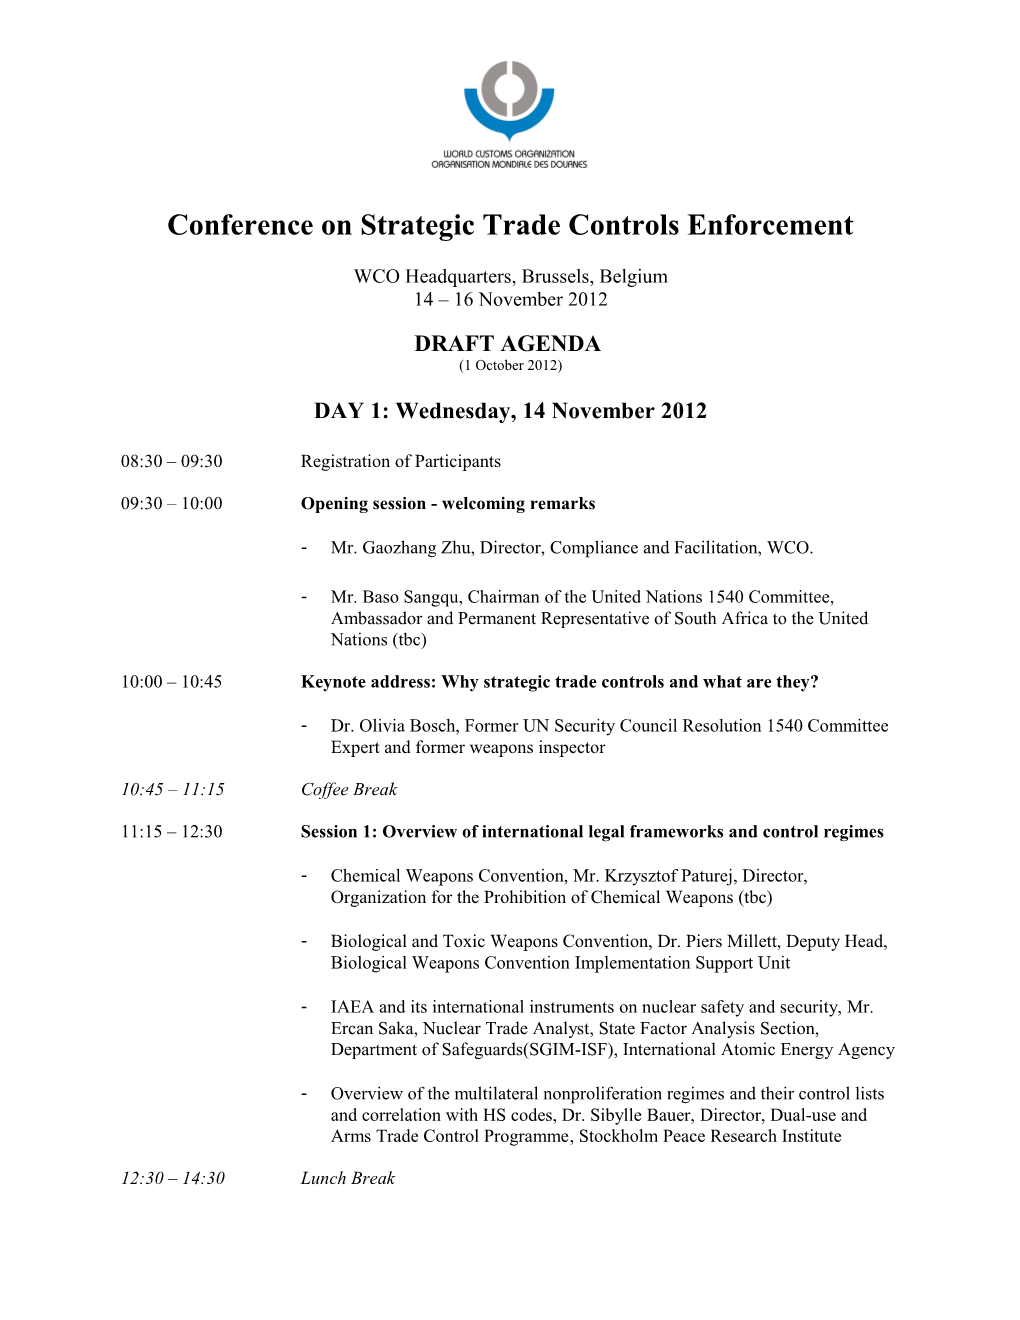 Conference on Strategic Trade Controls Enforcement s1